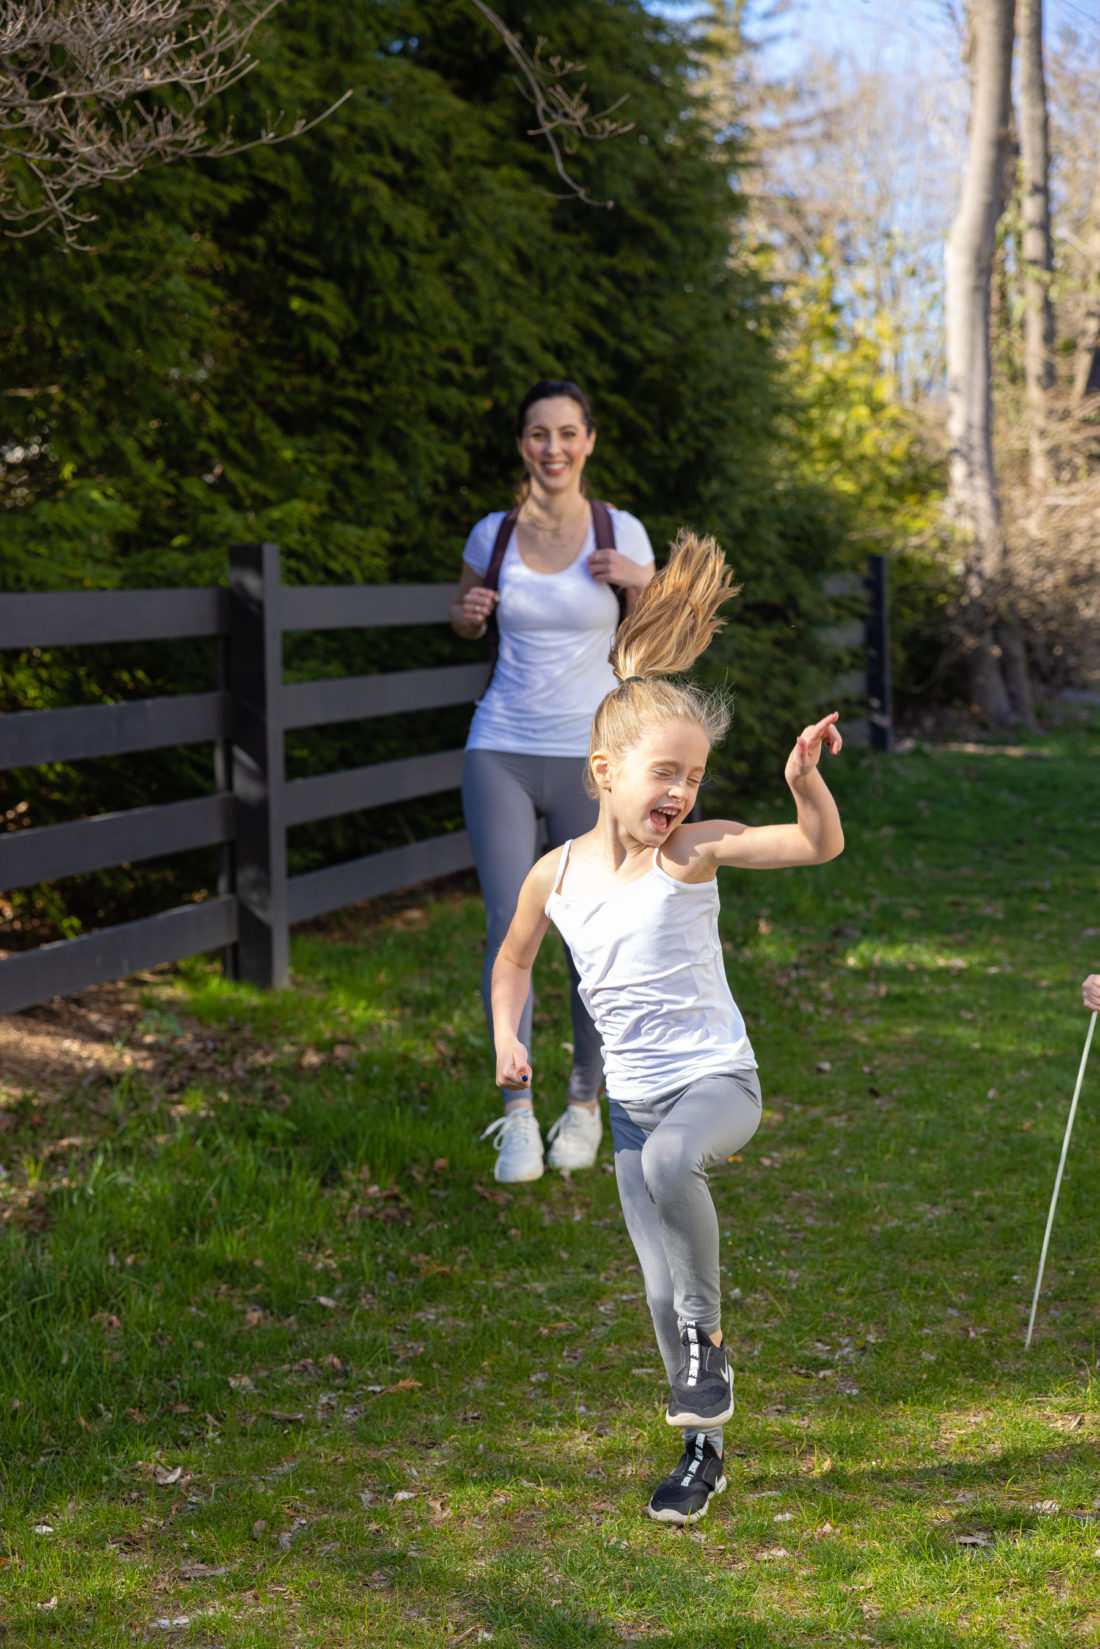 Eva Amurri shares some Spring Fitness Challenges to Keep Kids Active